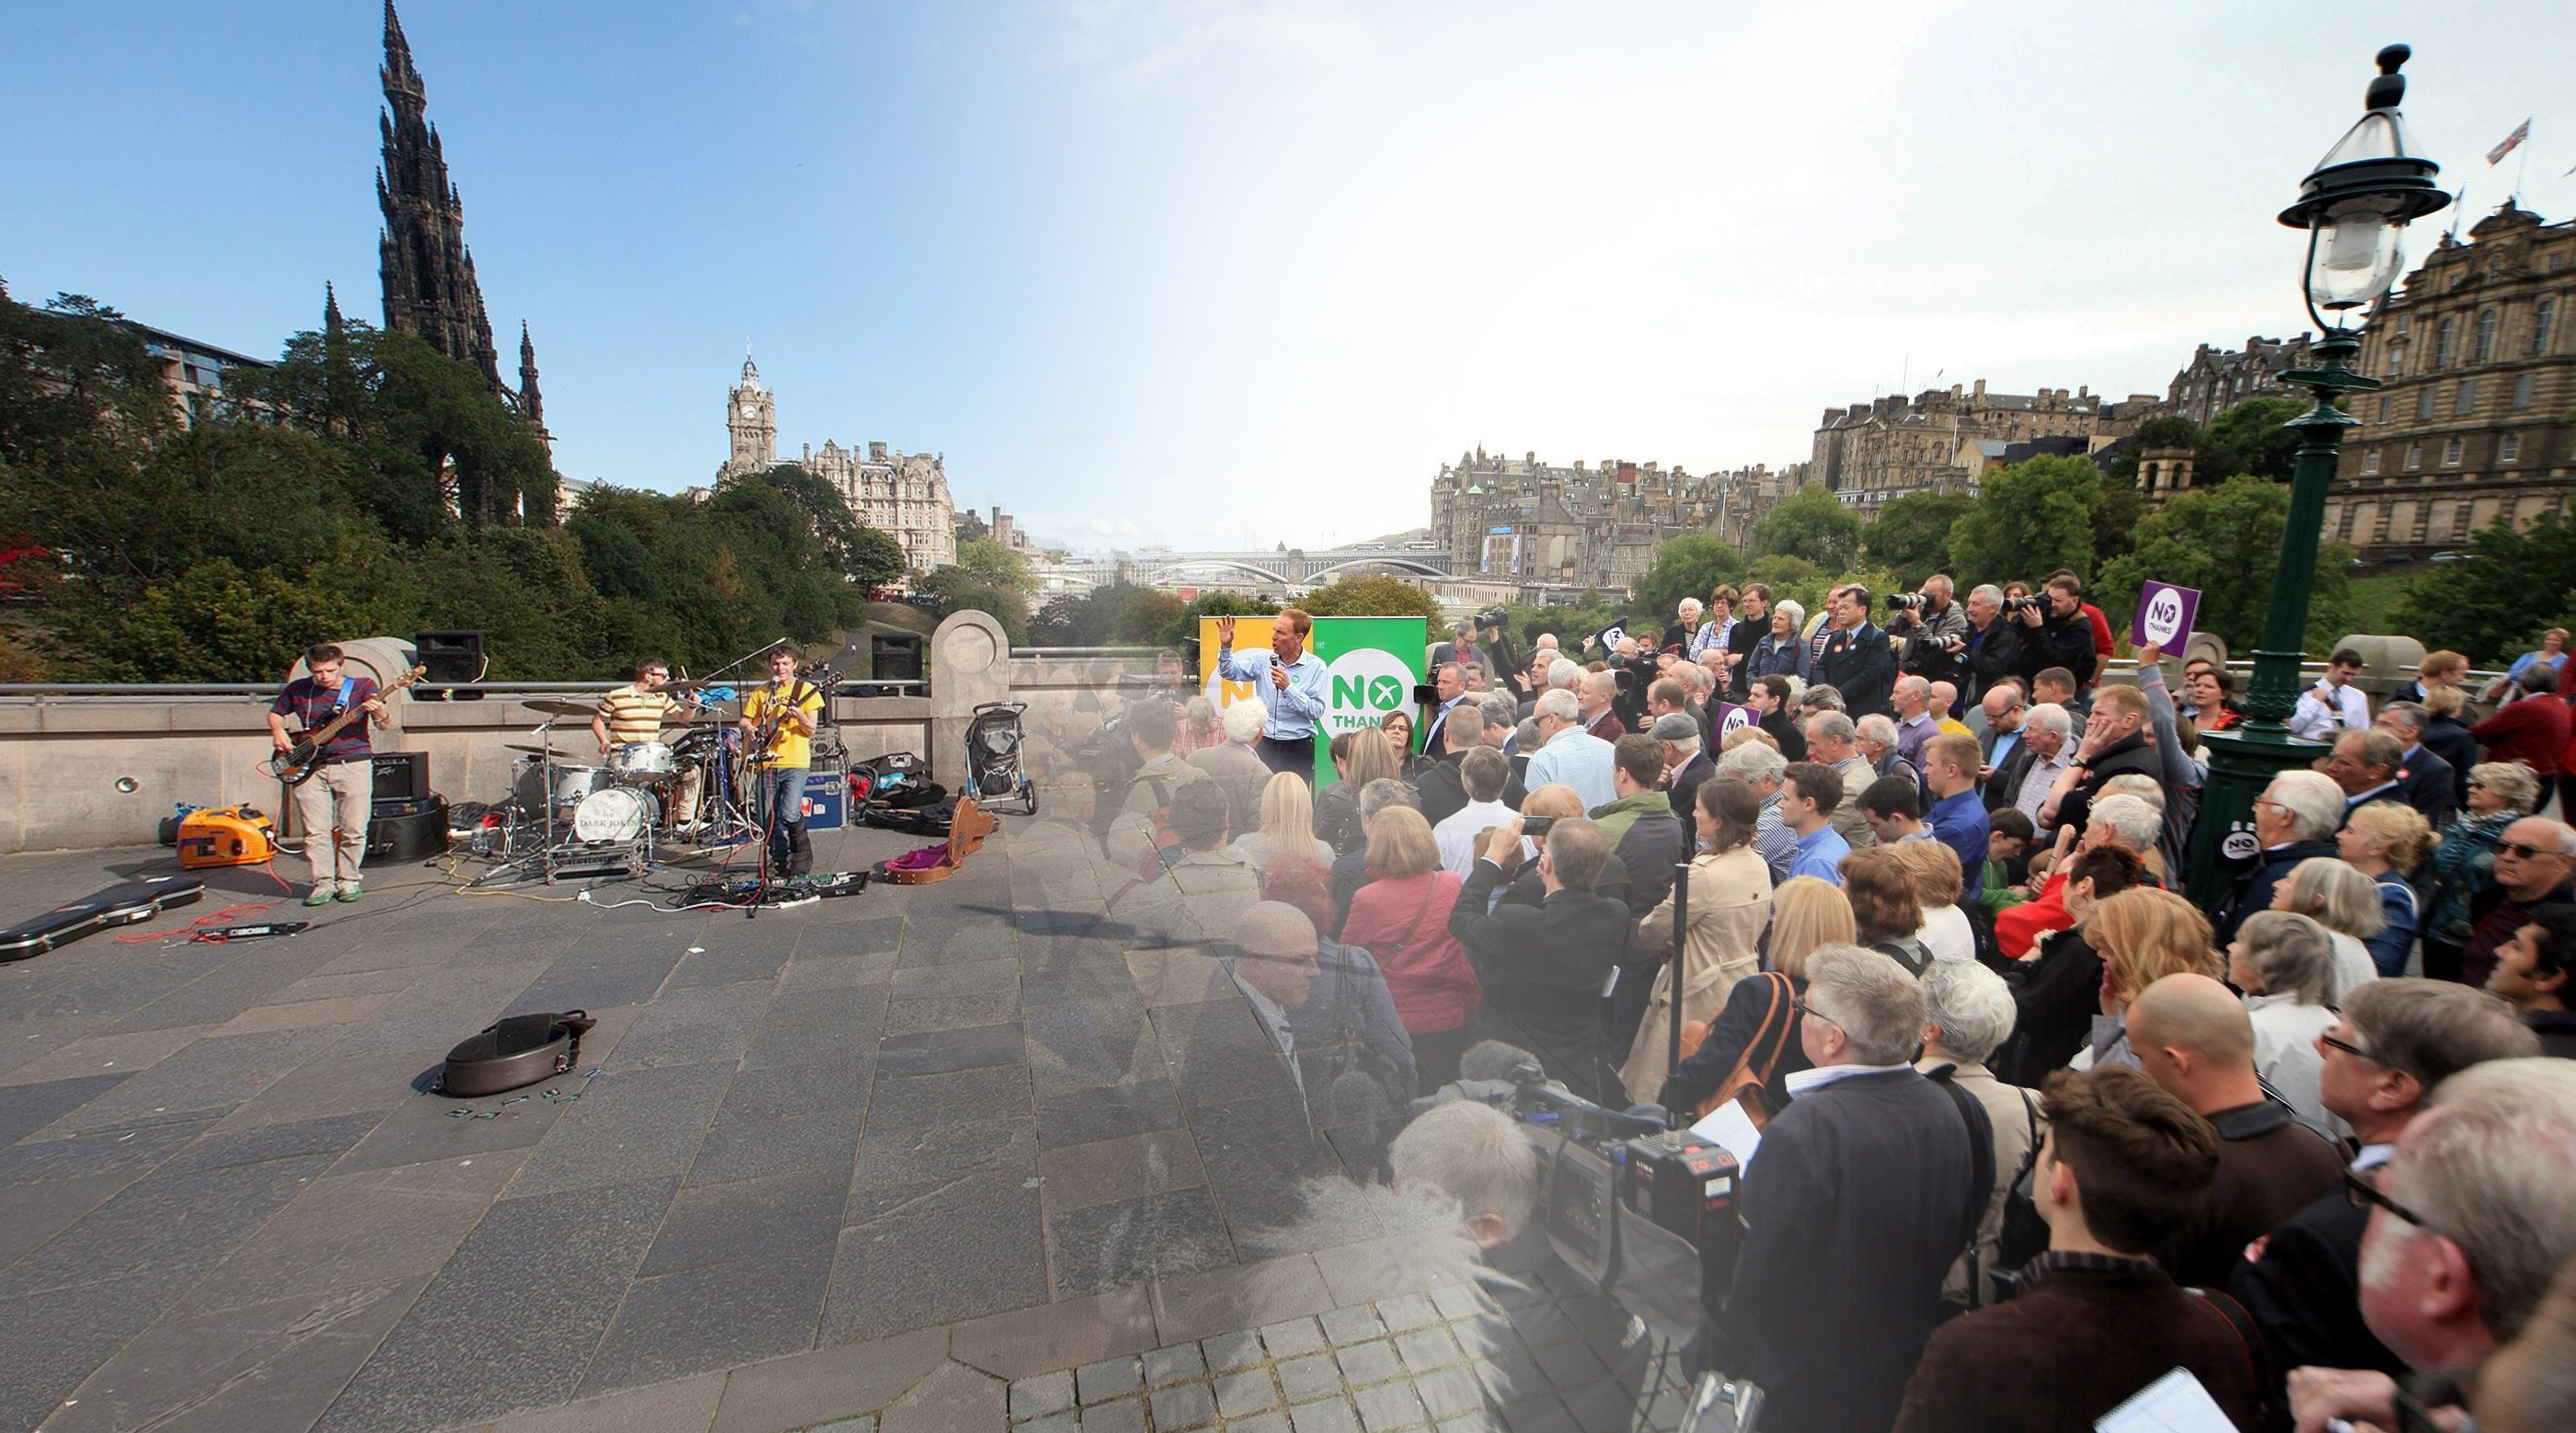 Then and now: Campaigning here on the Mound in Edinburgh last year was Jim Murphy MP during his '100 streets in 100 days'. It's been an eventful year for Mr Murphy but today all we see at the Mound is some aspiring musicians.